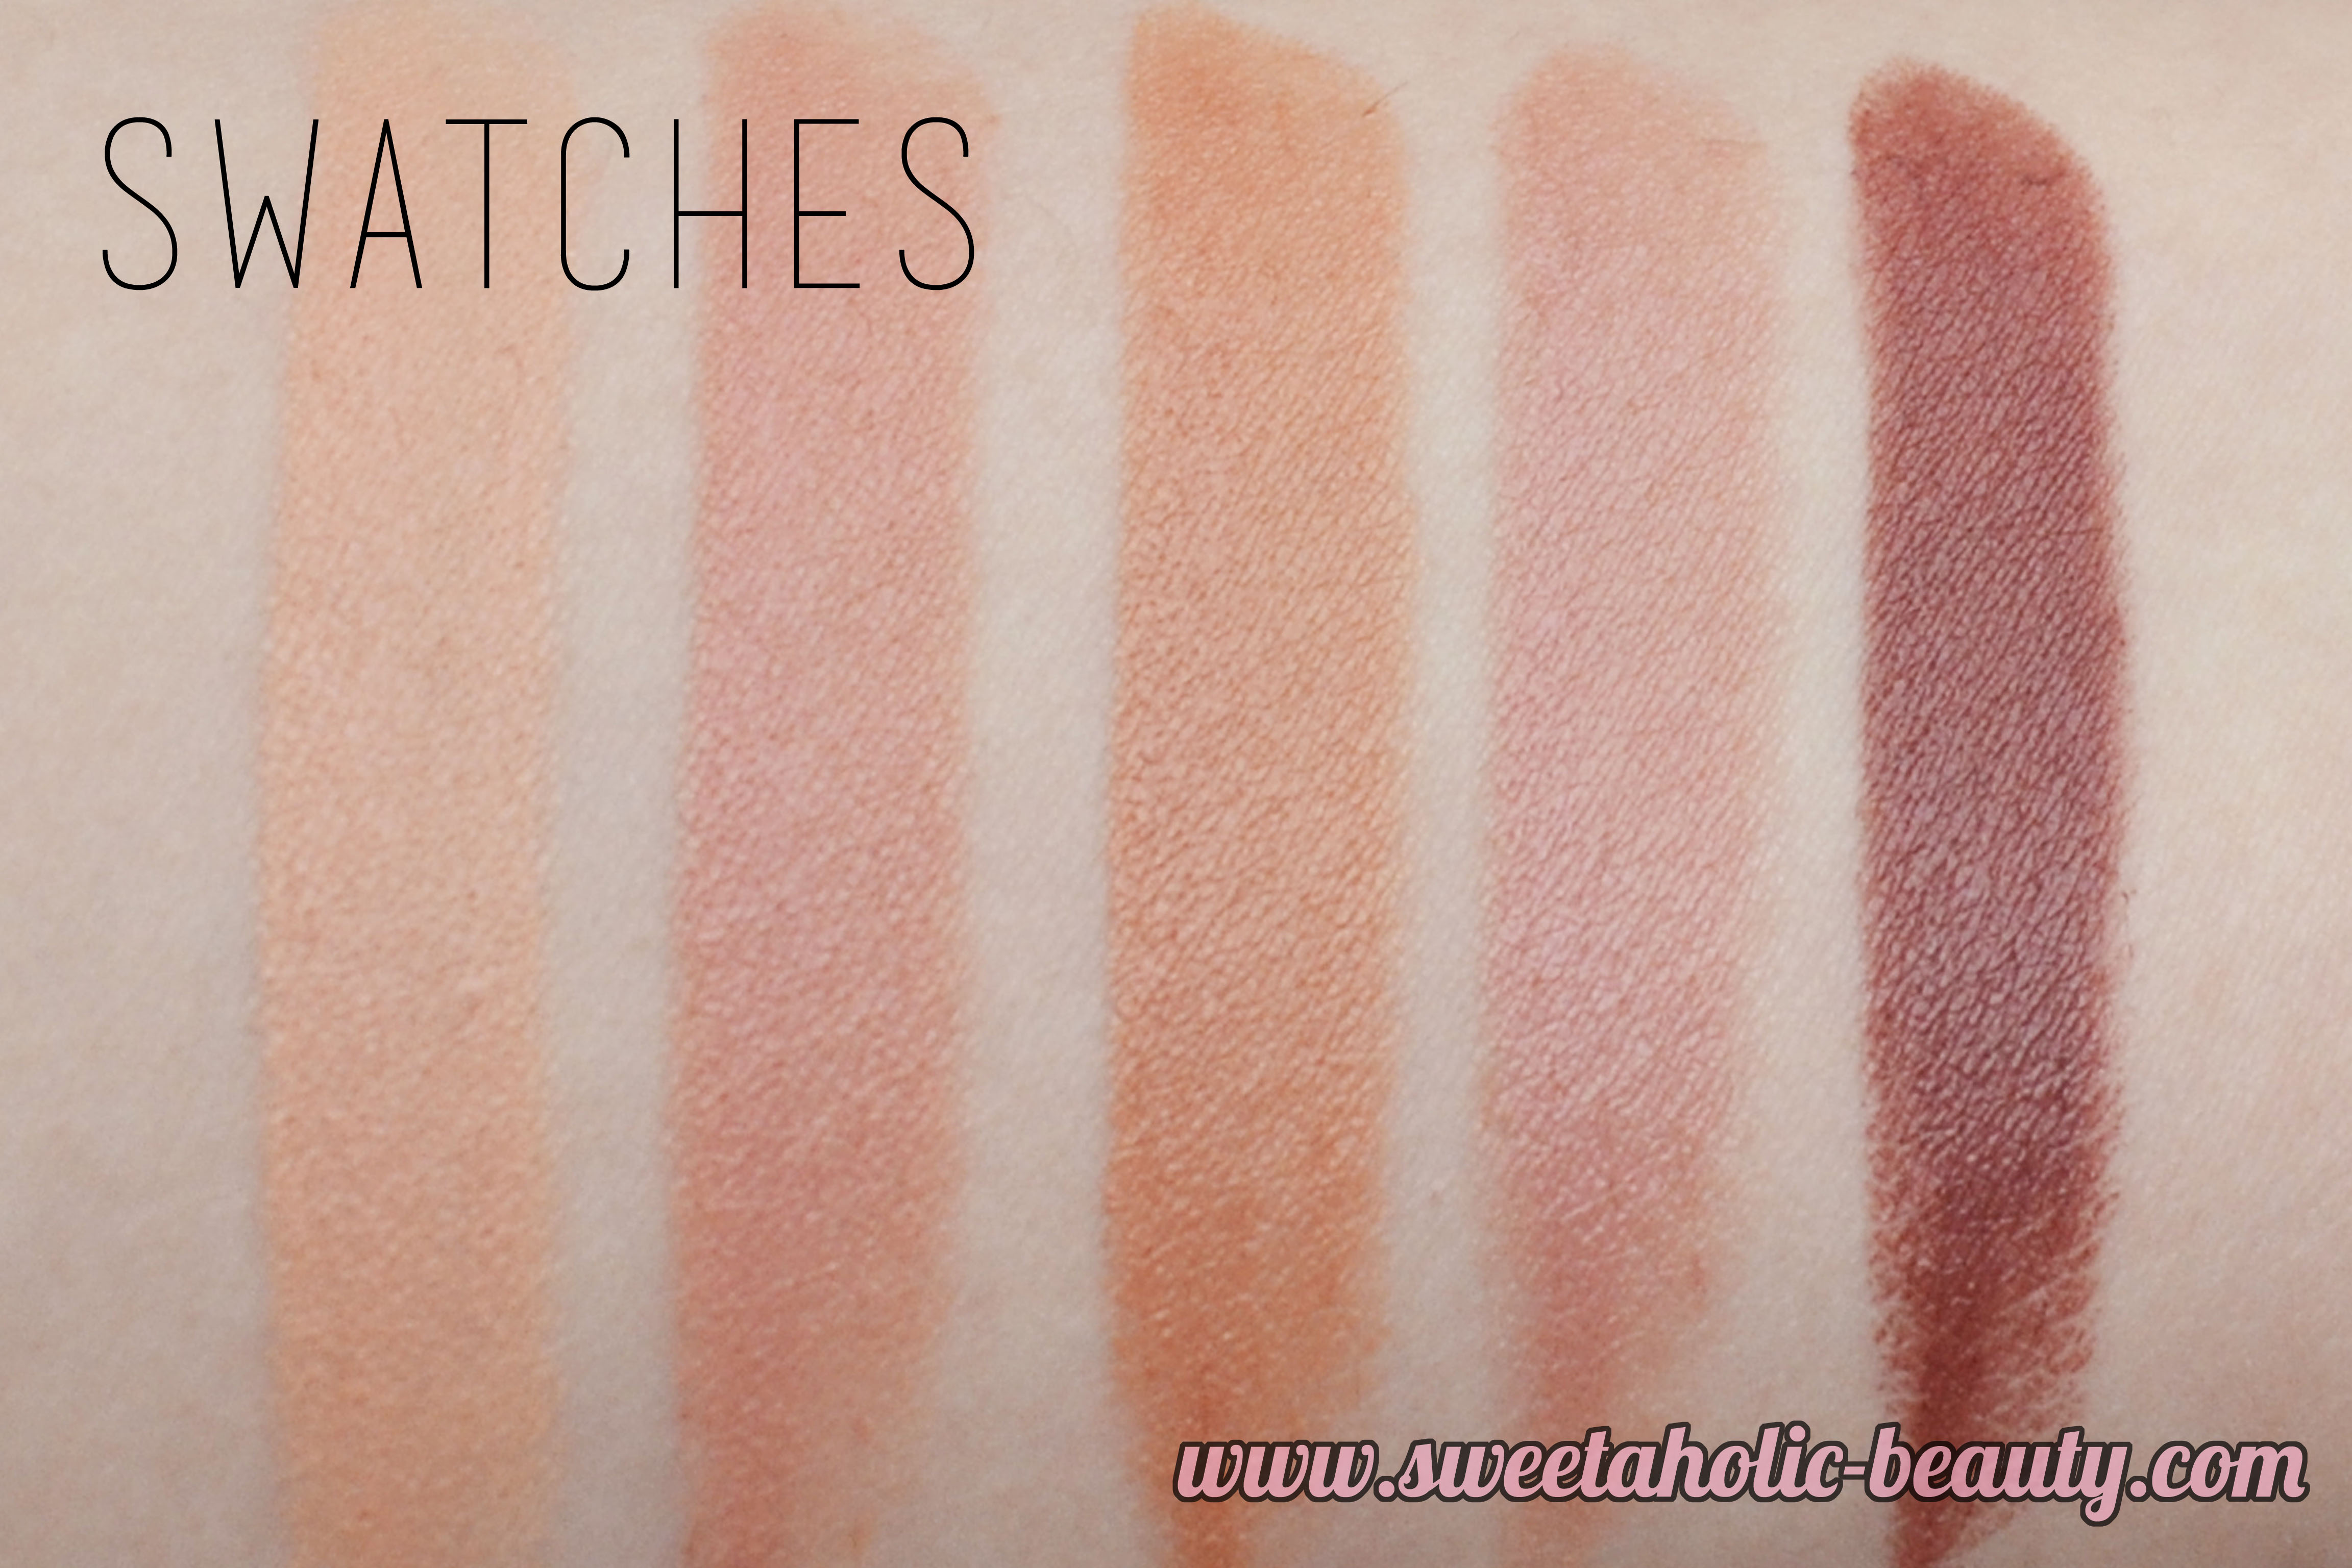 Rimmel London Lasting Finish by Kate Moss Nude Collection - Review and Swatches